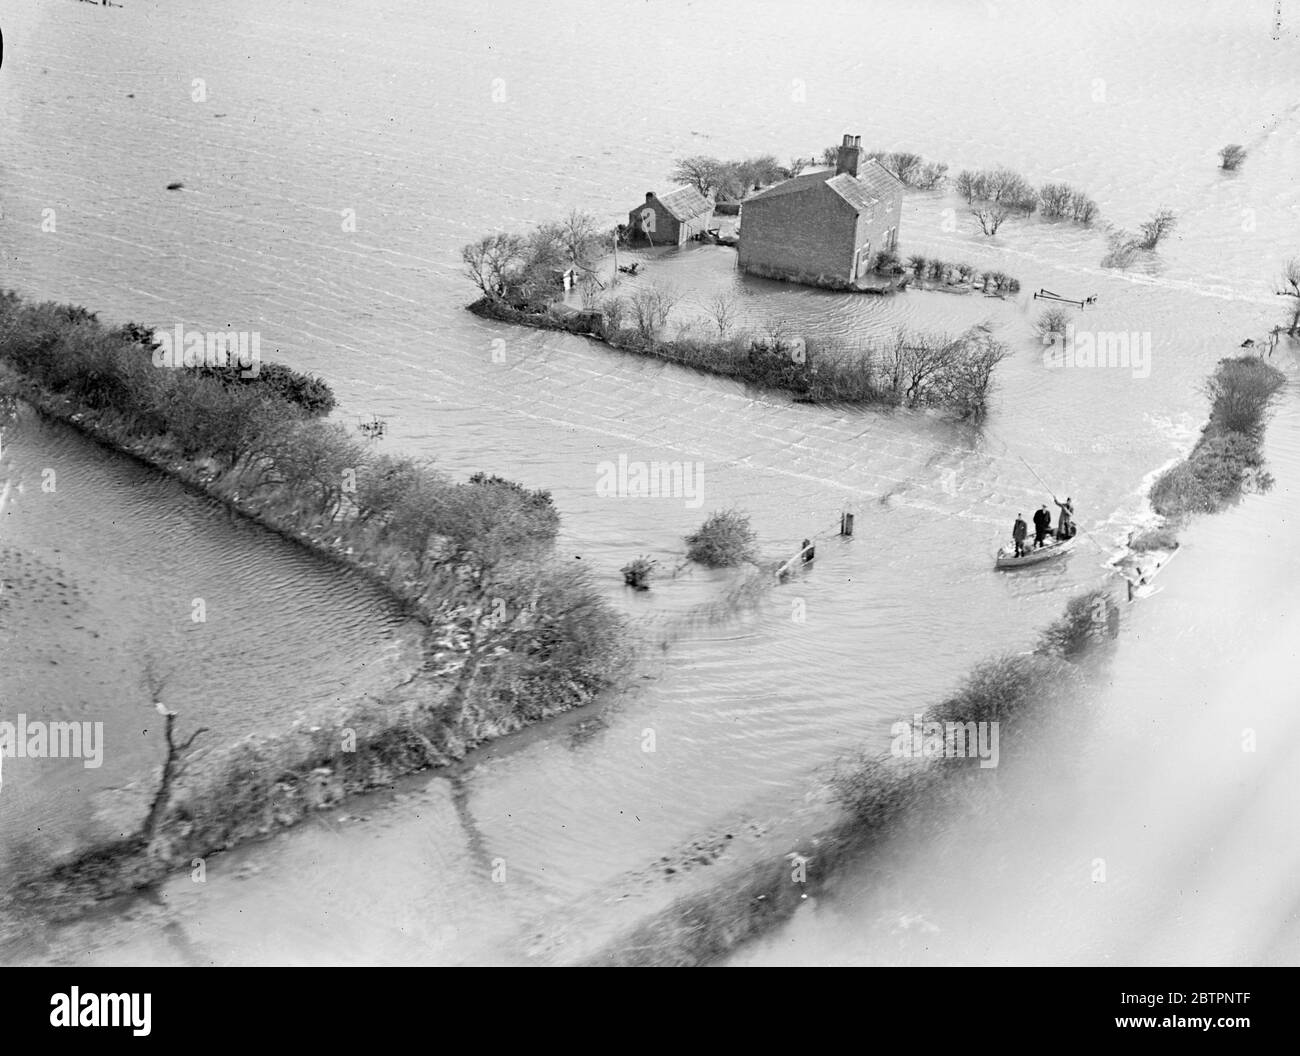 Pictures by special plane. The sea sweeps over East Norfolk. A new crisis caused by the maximum spring tide faced the flooded villages in the Horsey area of Norfolk today (Monday). The villages were flooded when the Gale lashed sea burst coast defences and swept inland covering 20 mi.Â². The sea forced a gap three miles long, believed to be the biggest made in East Norfolk for 50 years, and compelled 150 inhabitants of Horsey to leave their homes. Photo shows, people being rescued by boat from I'm a ruined farmhouse near Horsey.. 14 February 1938 Stock Photo